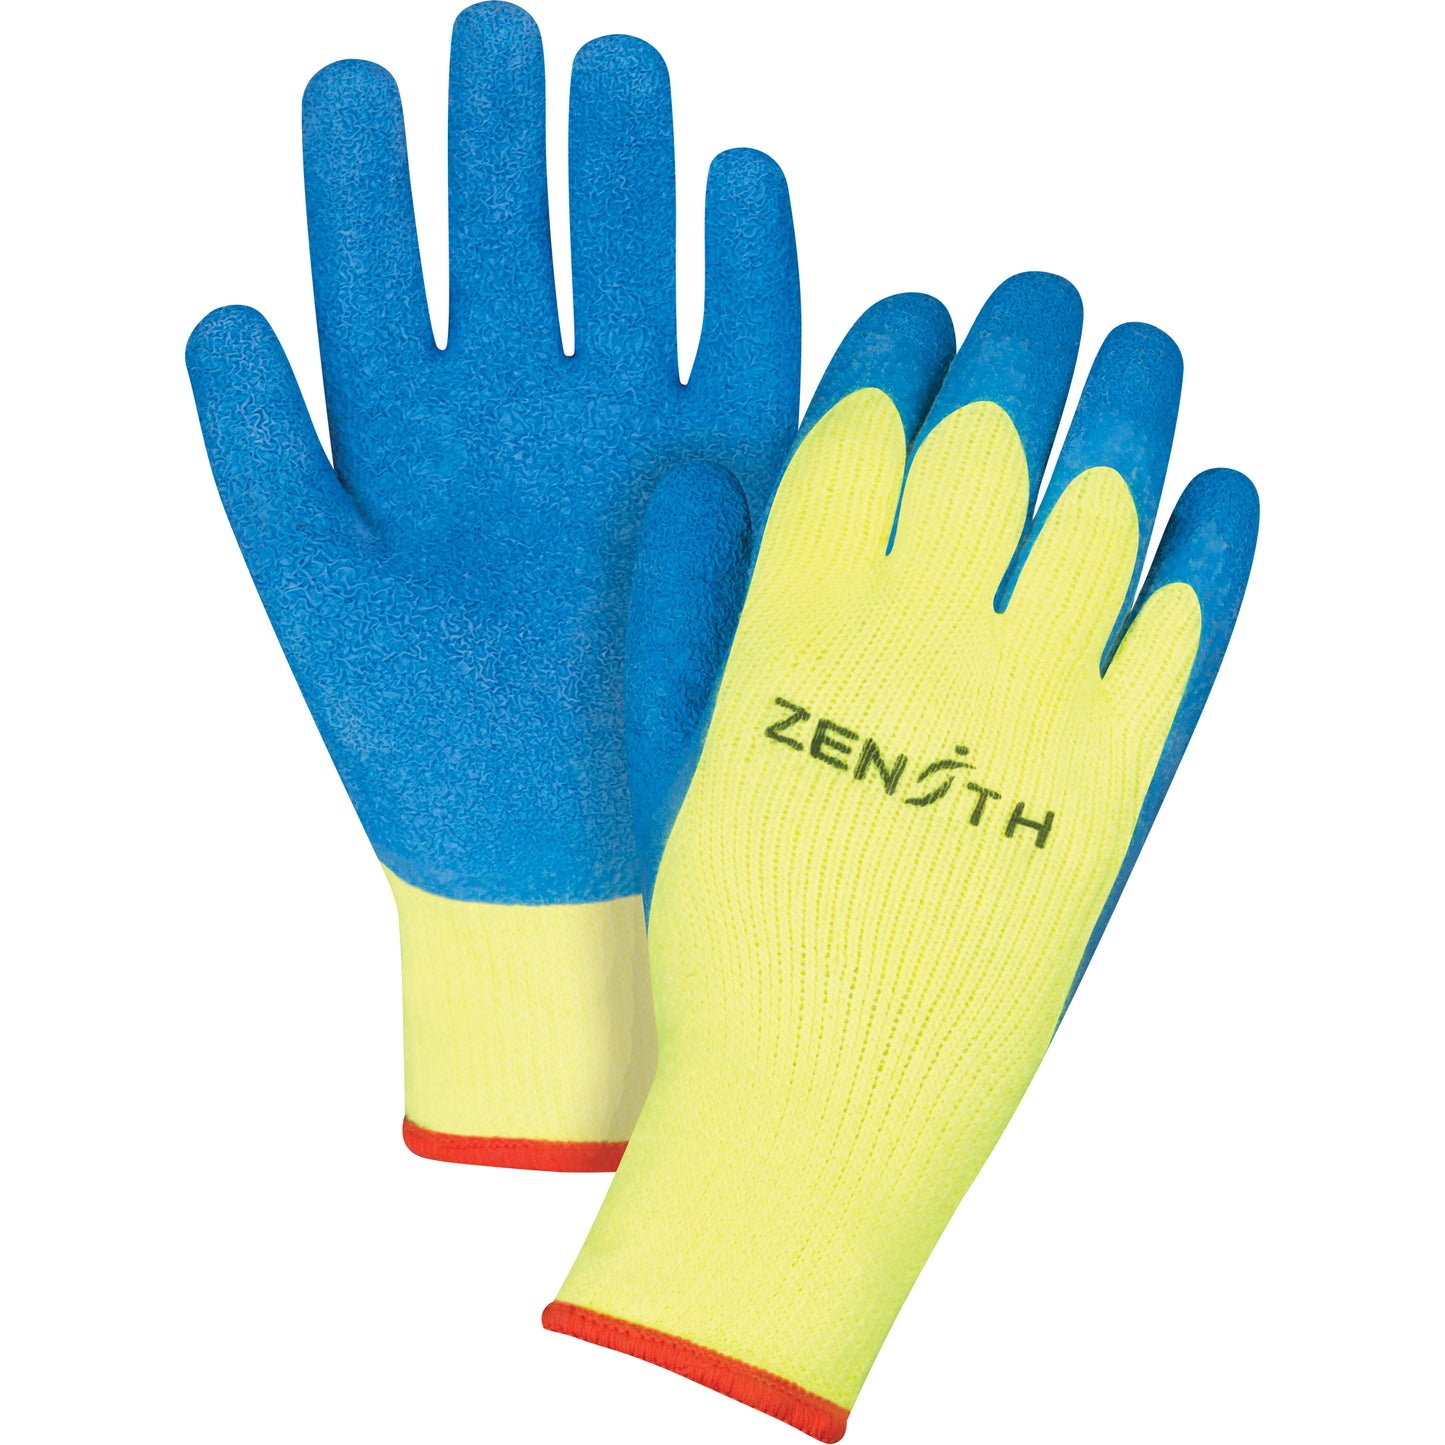 High visibility gloves lined with acrylic &amp; rubber coated ZENITH terry cloth cover